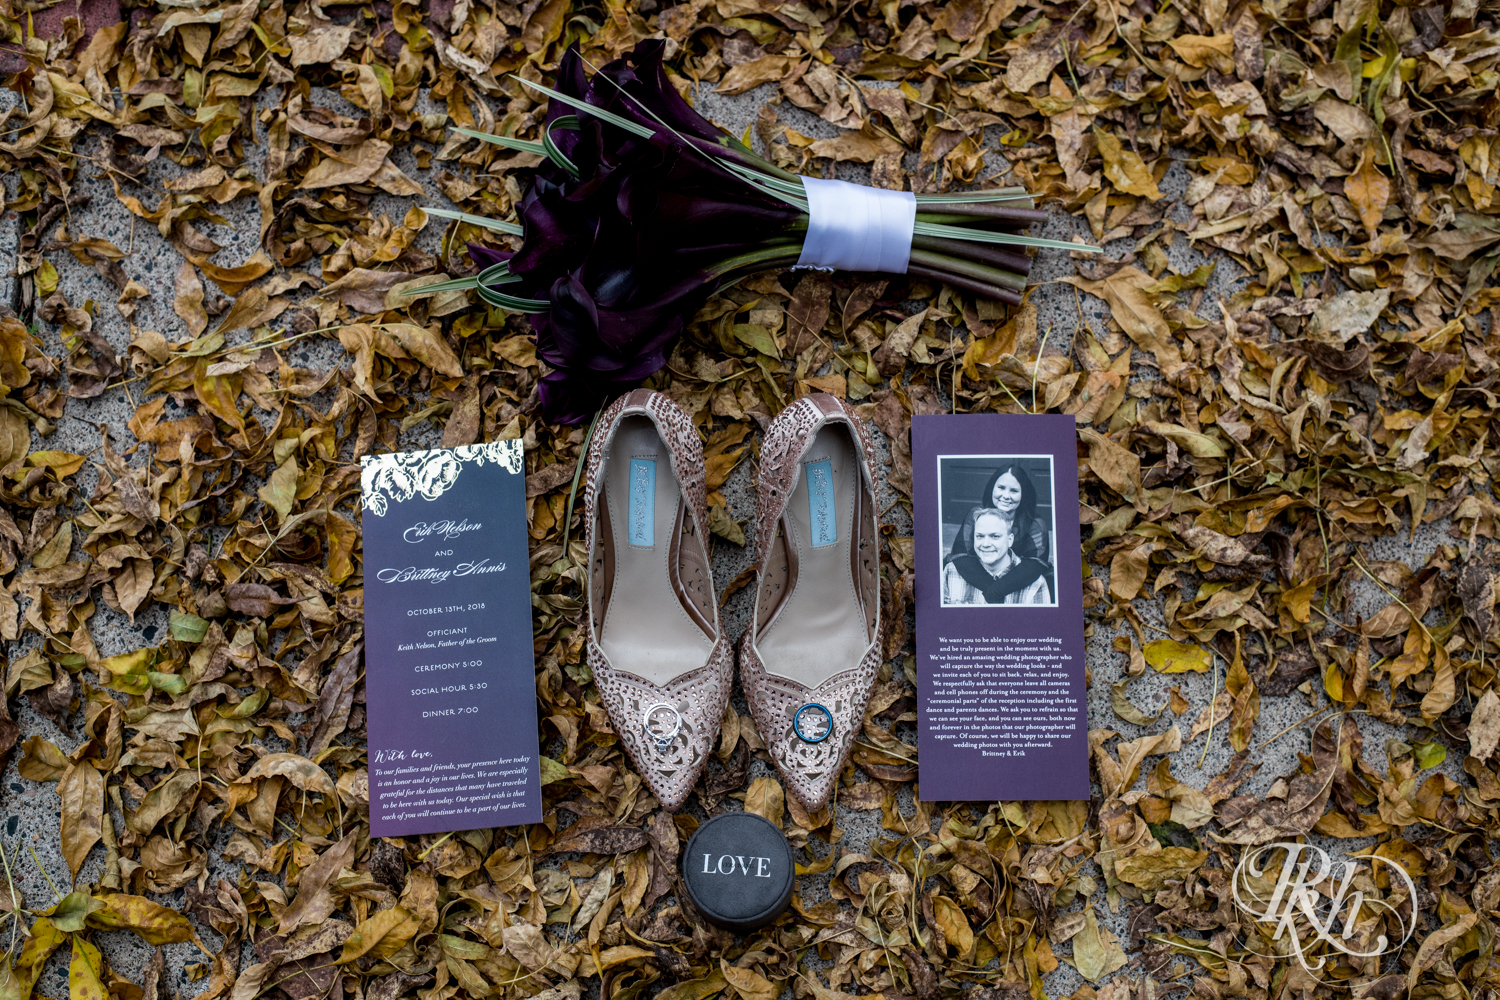 October wedding invites, rings and flowers in the leaves.